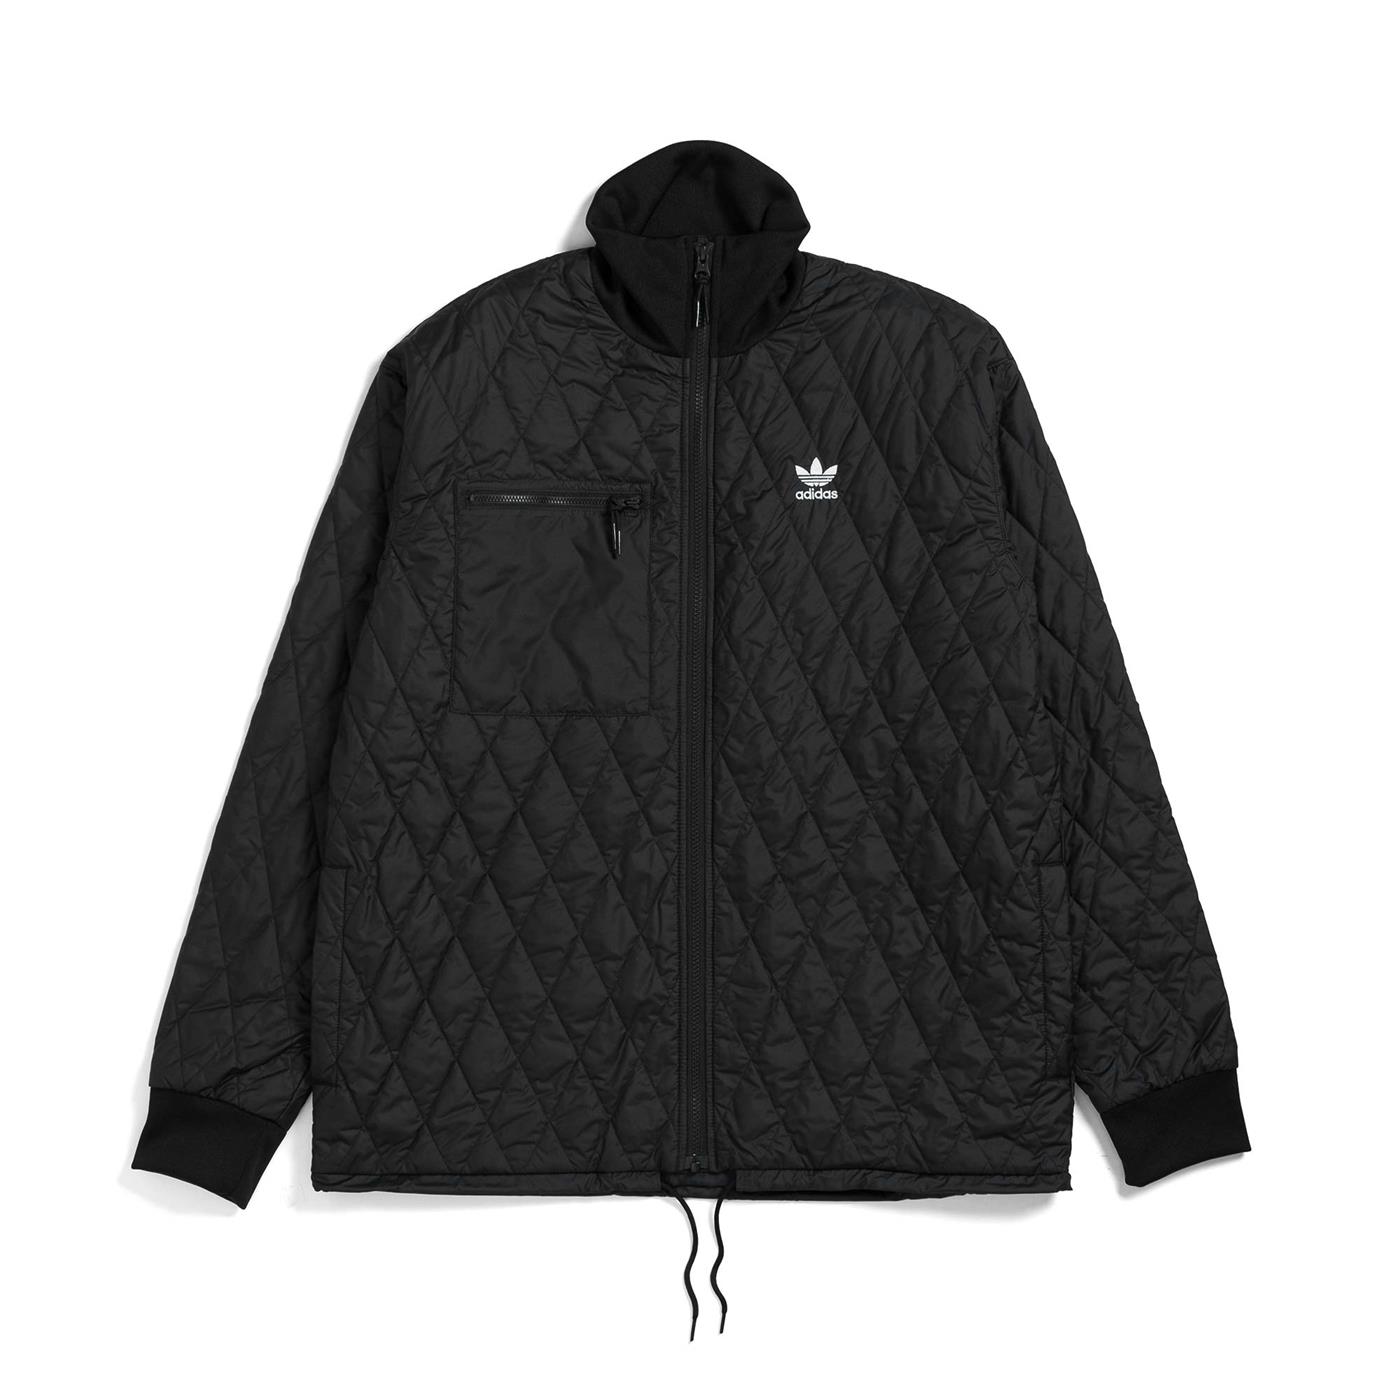 EllisonbronzeShops | adidas b28014 shoes clearance | H11430 | ADIDAS Quilted AR Jacket Black for